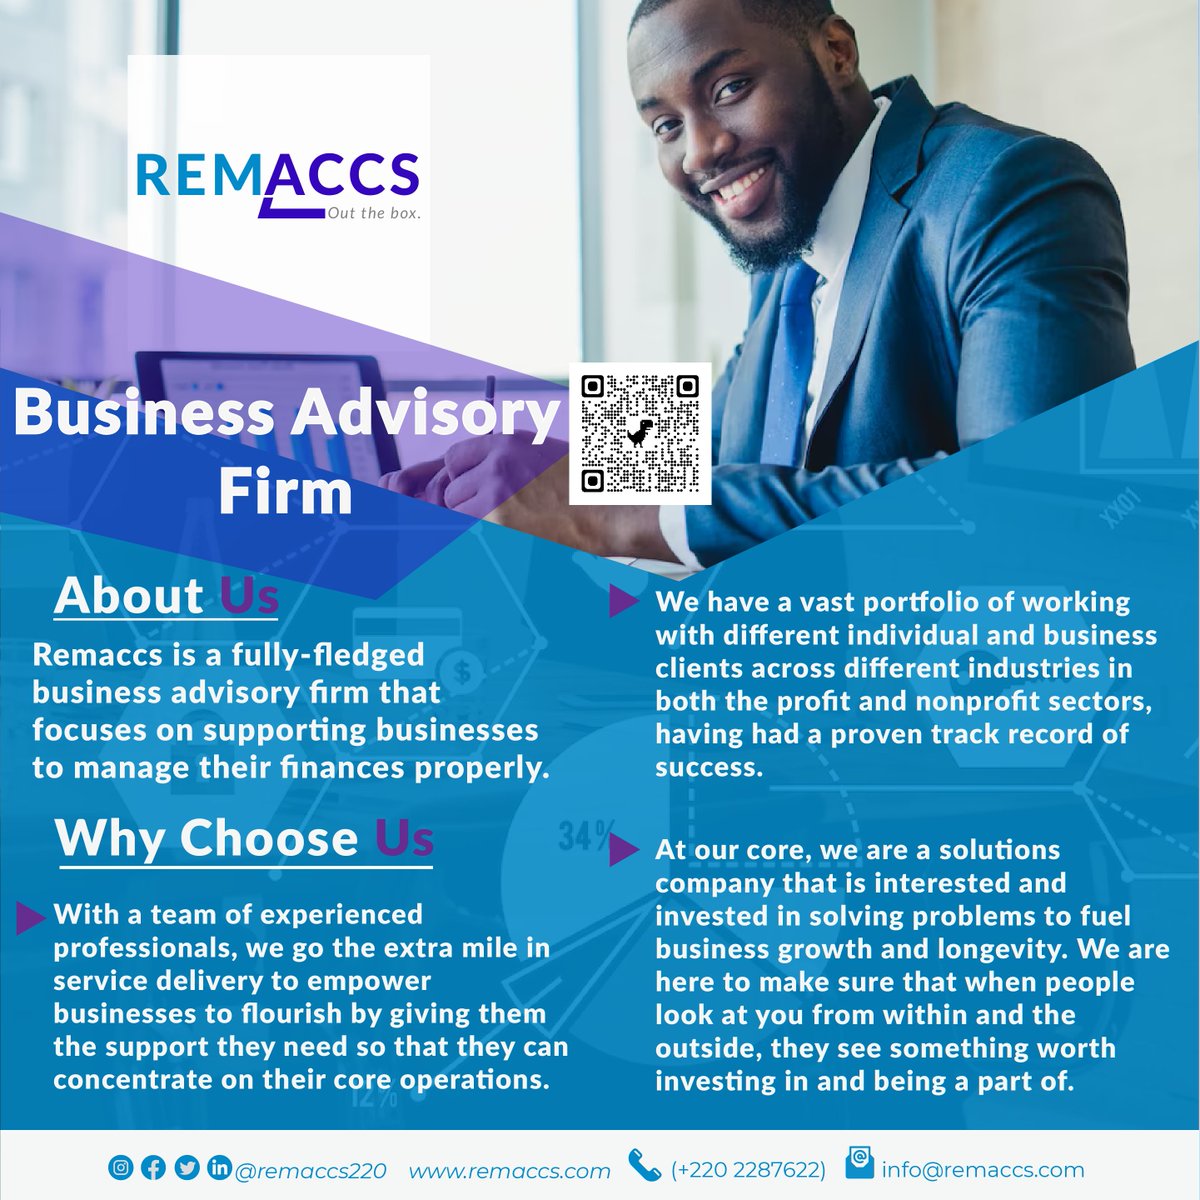 Welcome to #Remaccs, your go-to business advisory firm for expert insights, resources, and industry trends. We help all size businesses achieve success with #SmallBusinessAdvisory, #InternalAuditing, #PolicyDevelopment, #QuickbooksServices, #POSSetup, and #AccountingSystems.